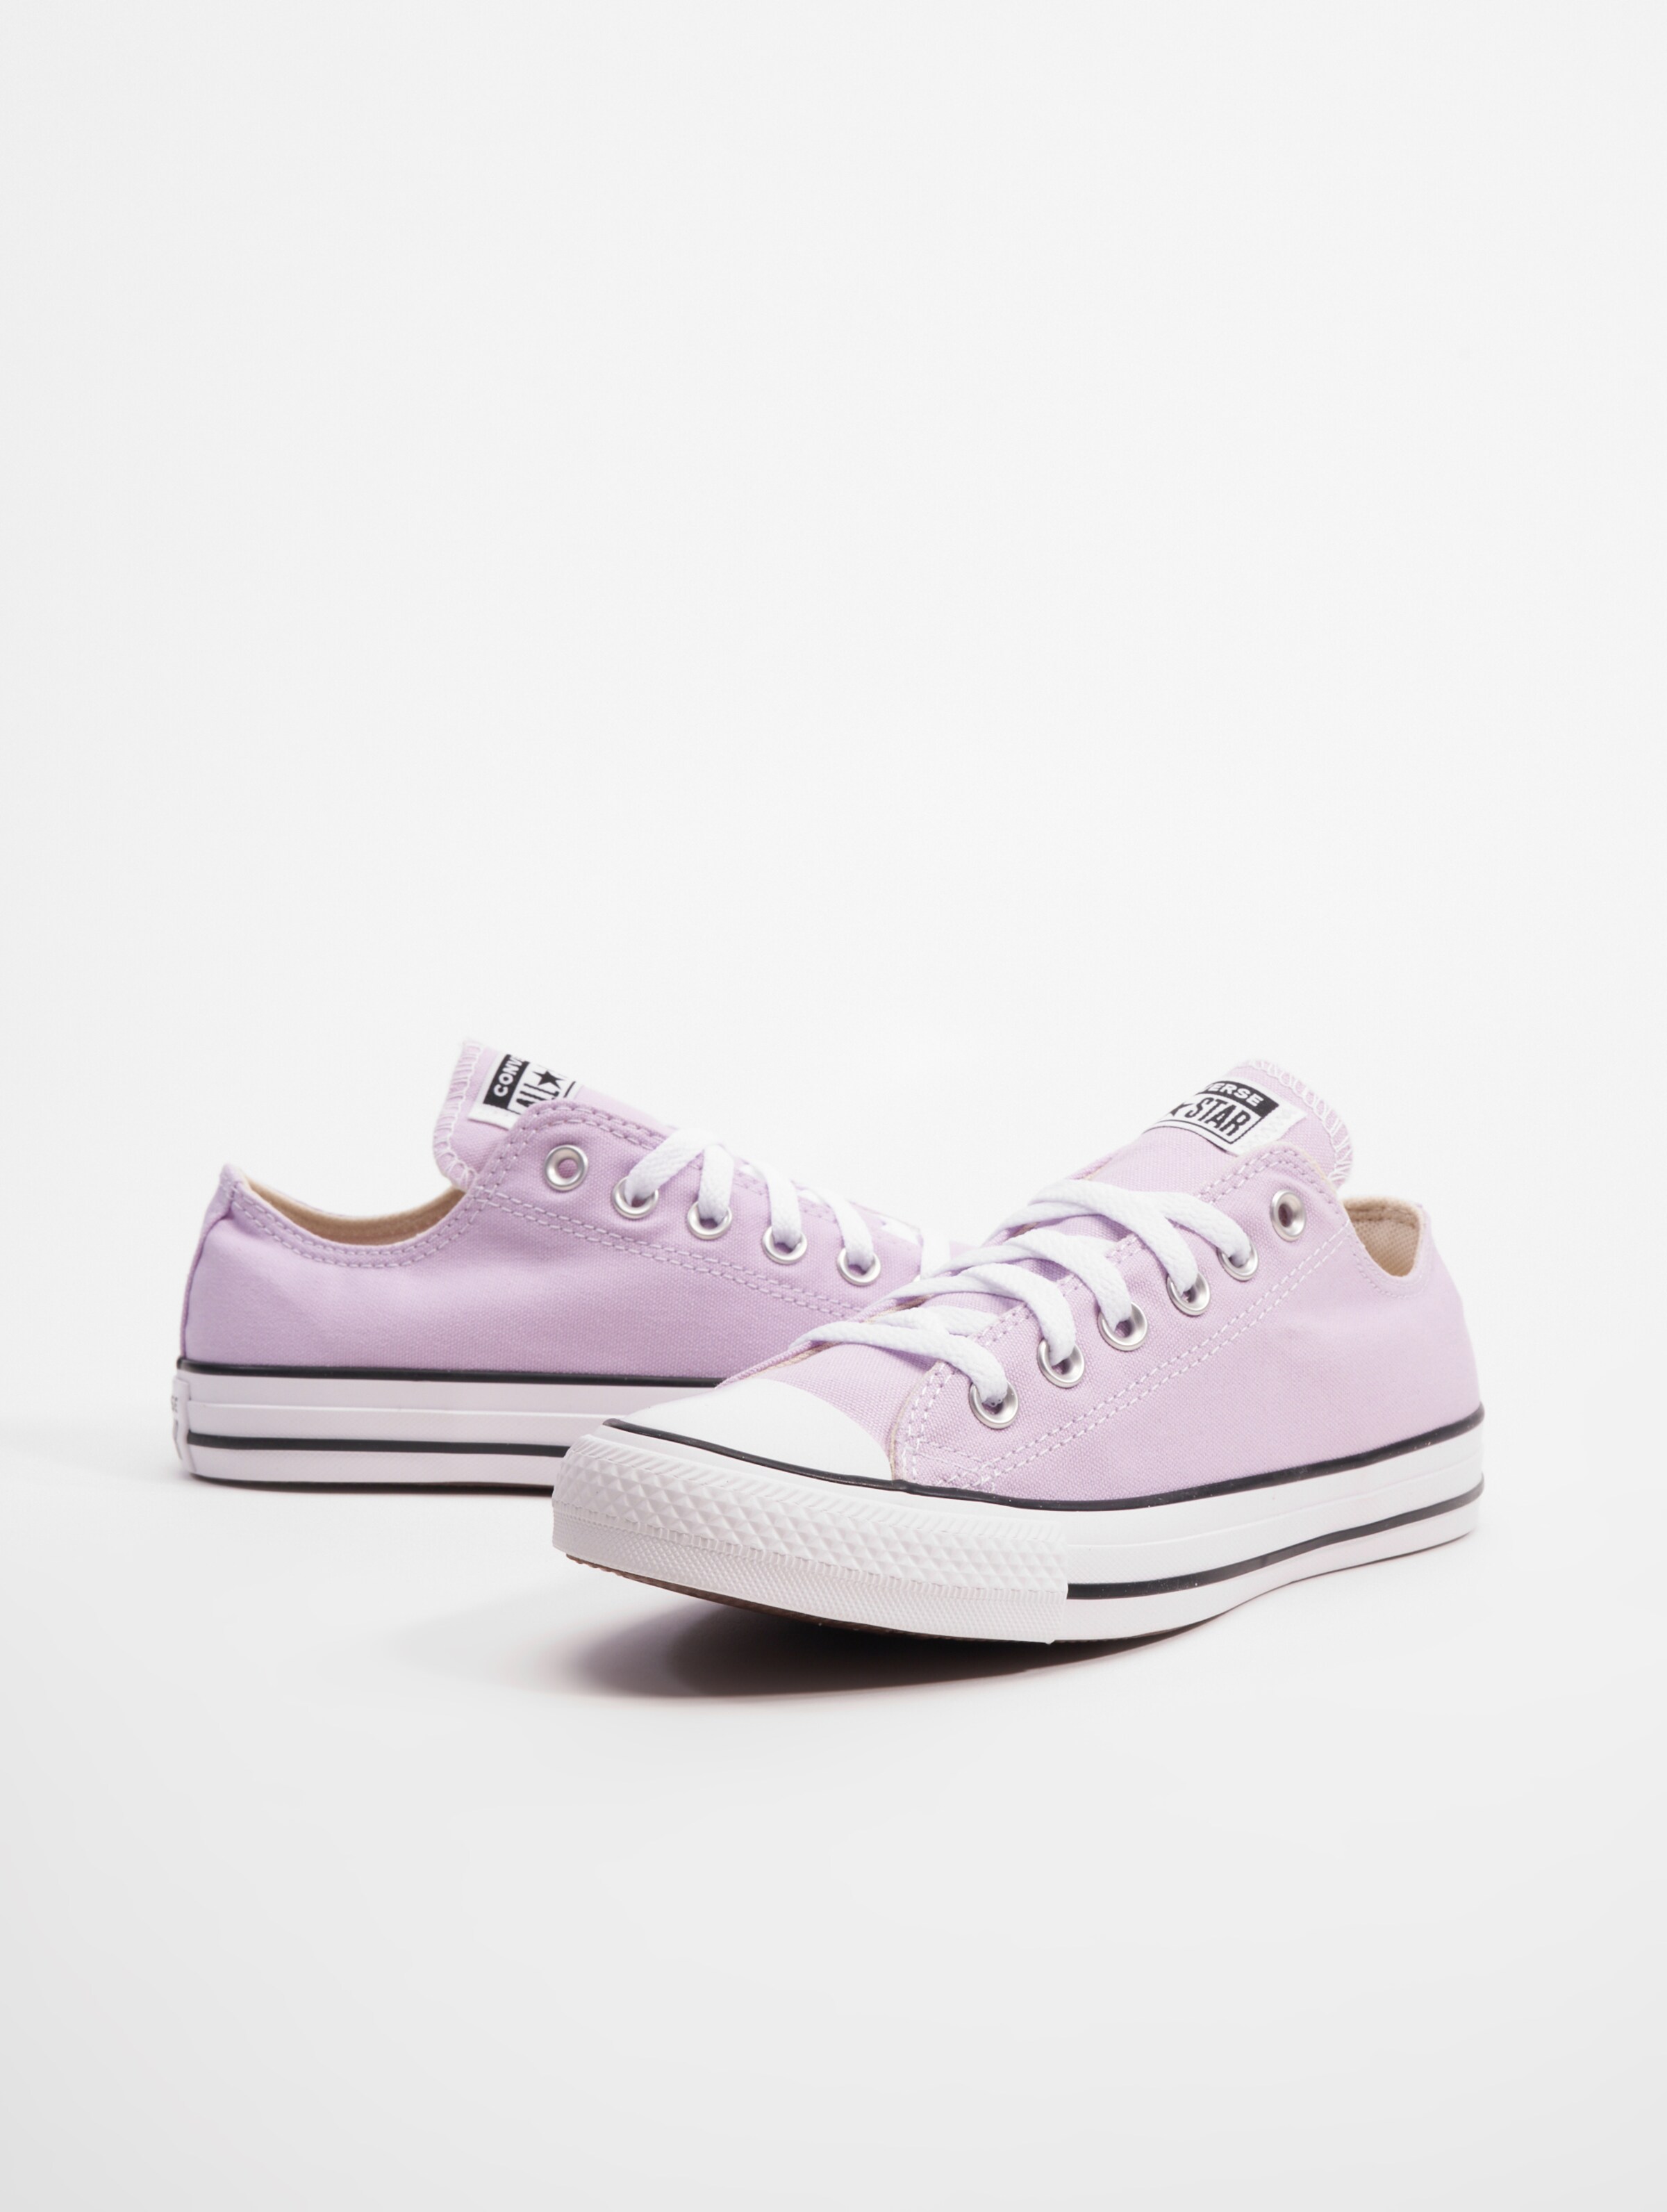 Converse Chuck Taylor All Star 50/50 Recycled Cotton Vrouwen op kleur violet, Maat 39